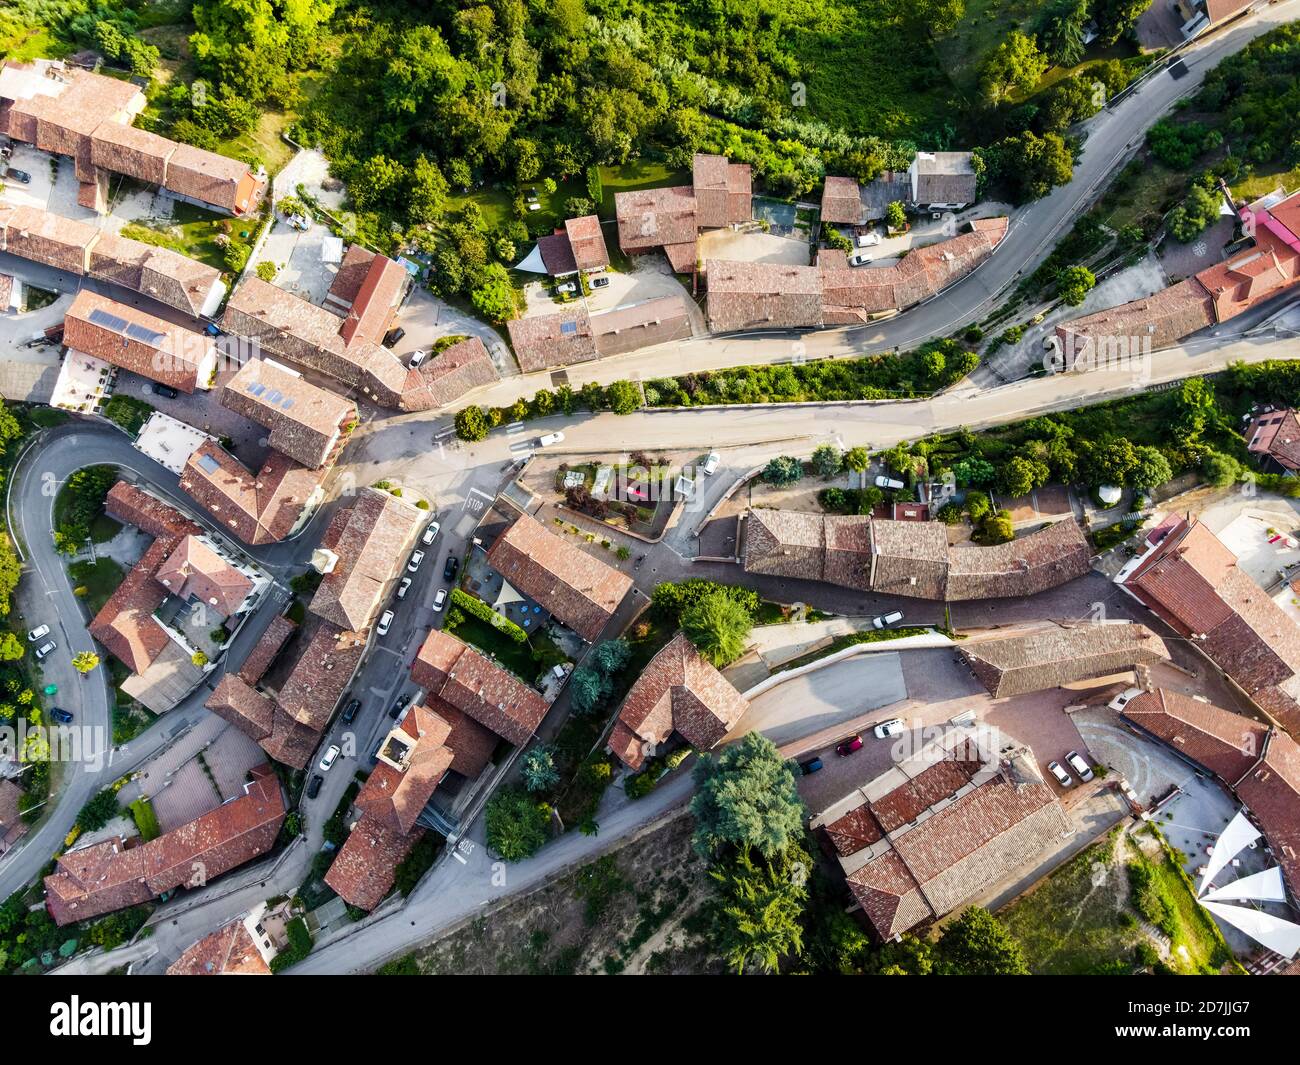 Drone view of roads winding through rural town Stock Photo